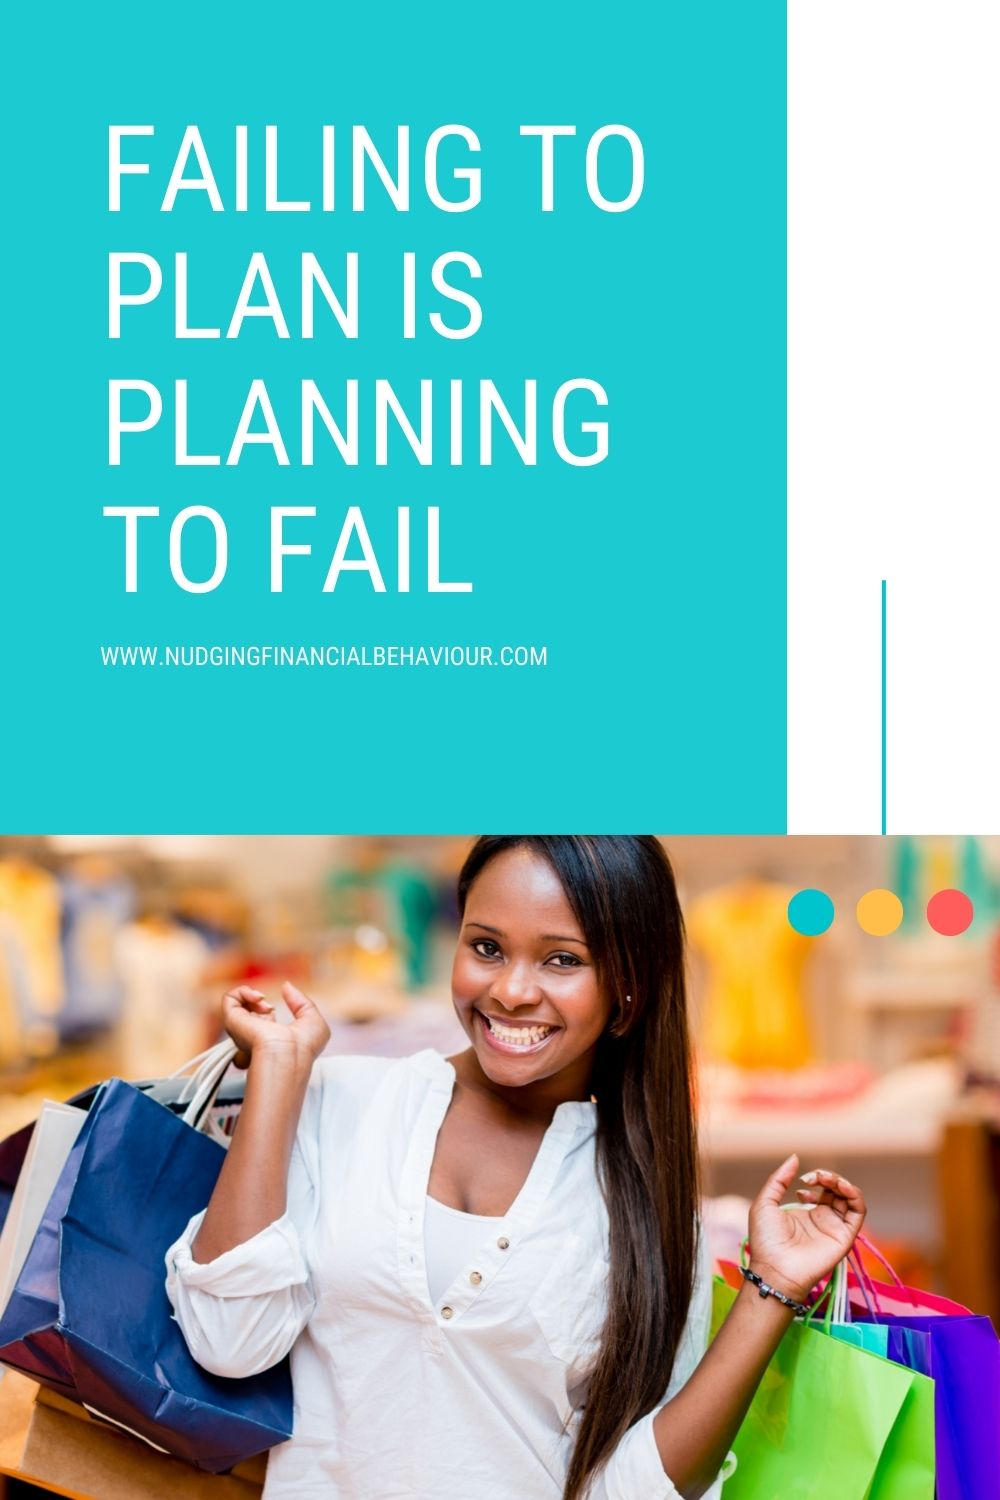 Failing to plan is planning to fail meaning